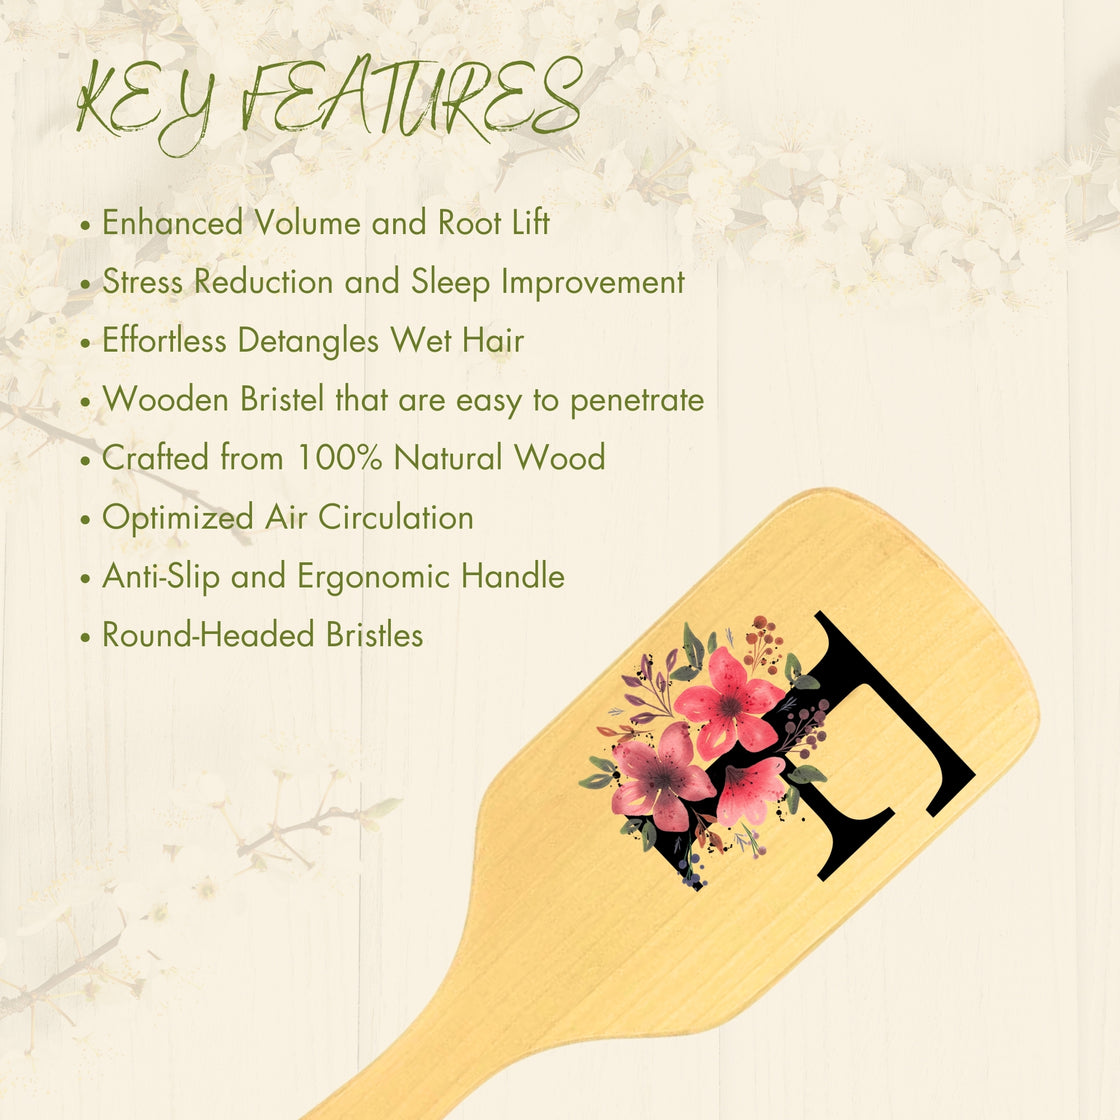  Allure Personalised wooden paddle hair brush with letter F